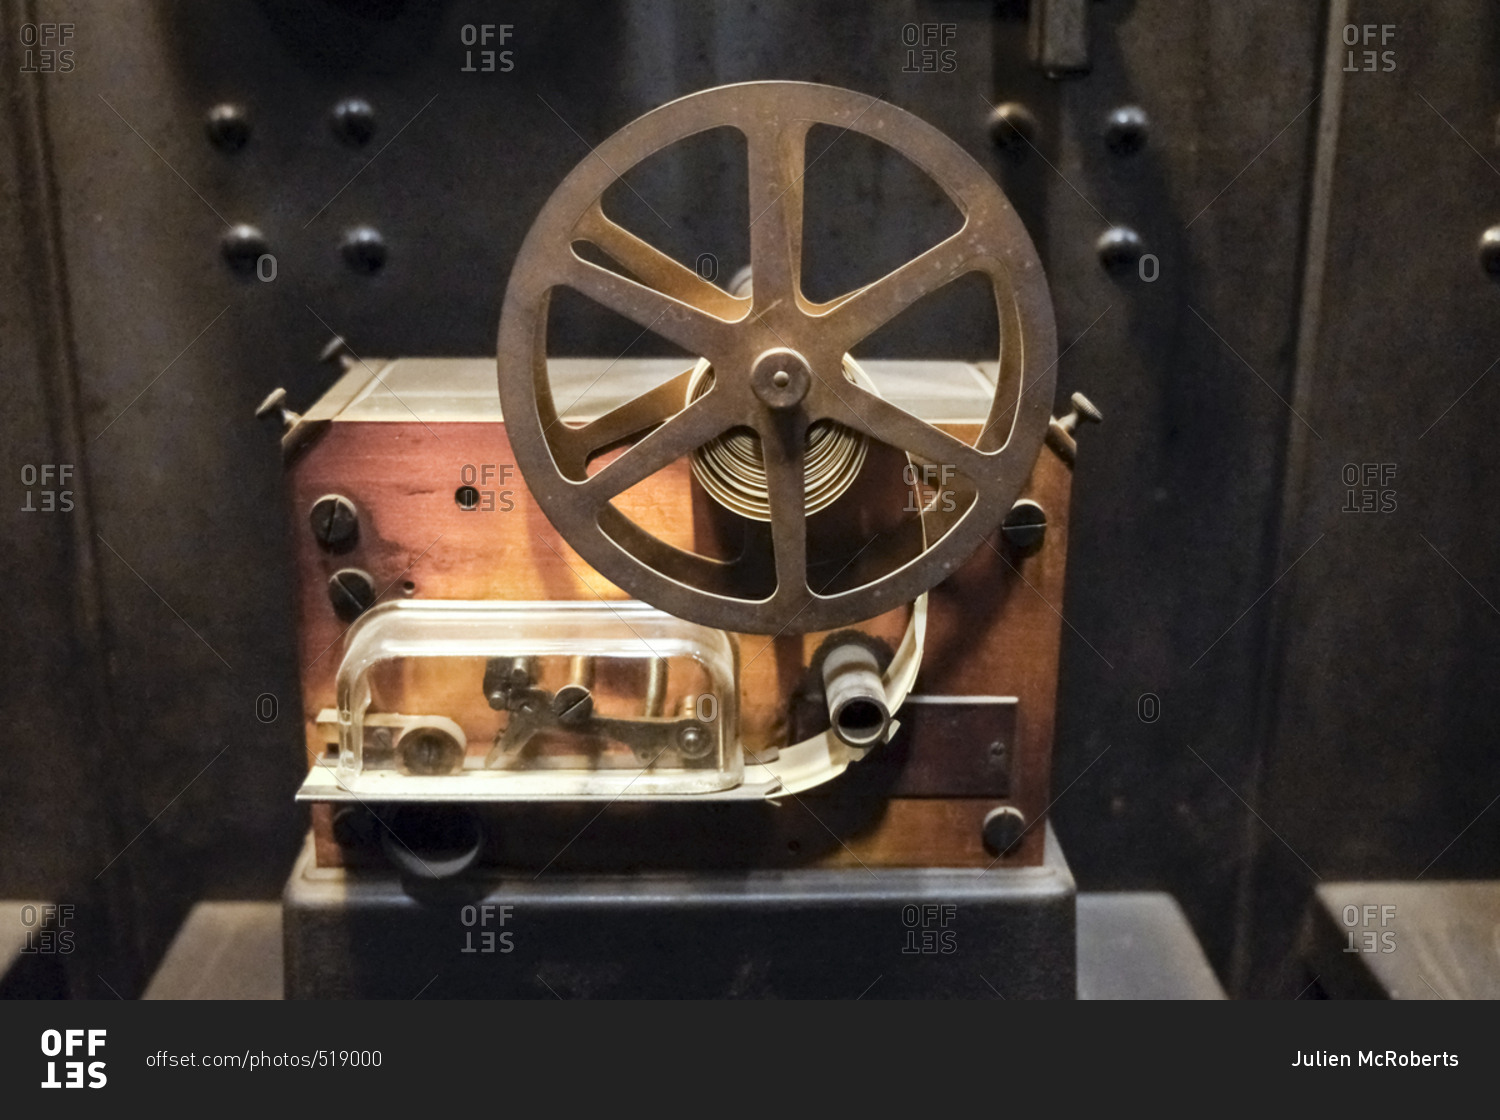 Old ticker tape machine in Grand Central, New York - Stock Image